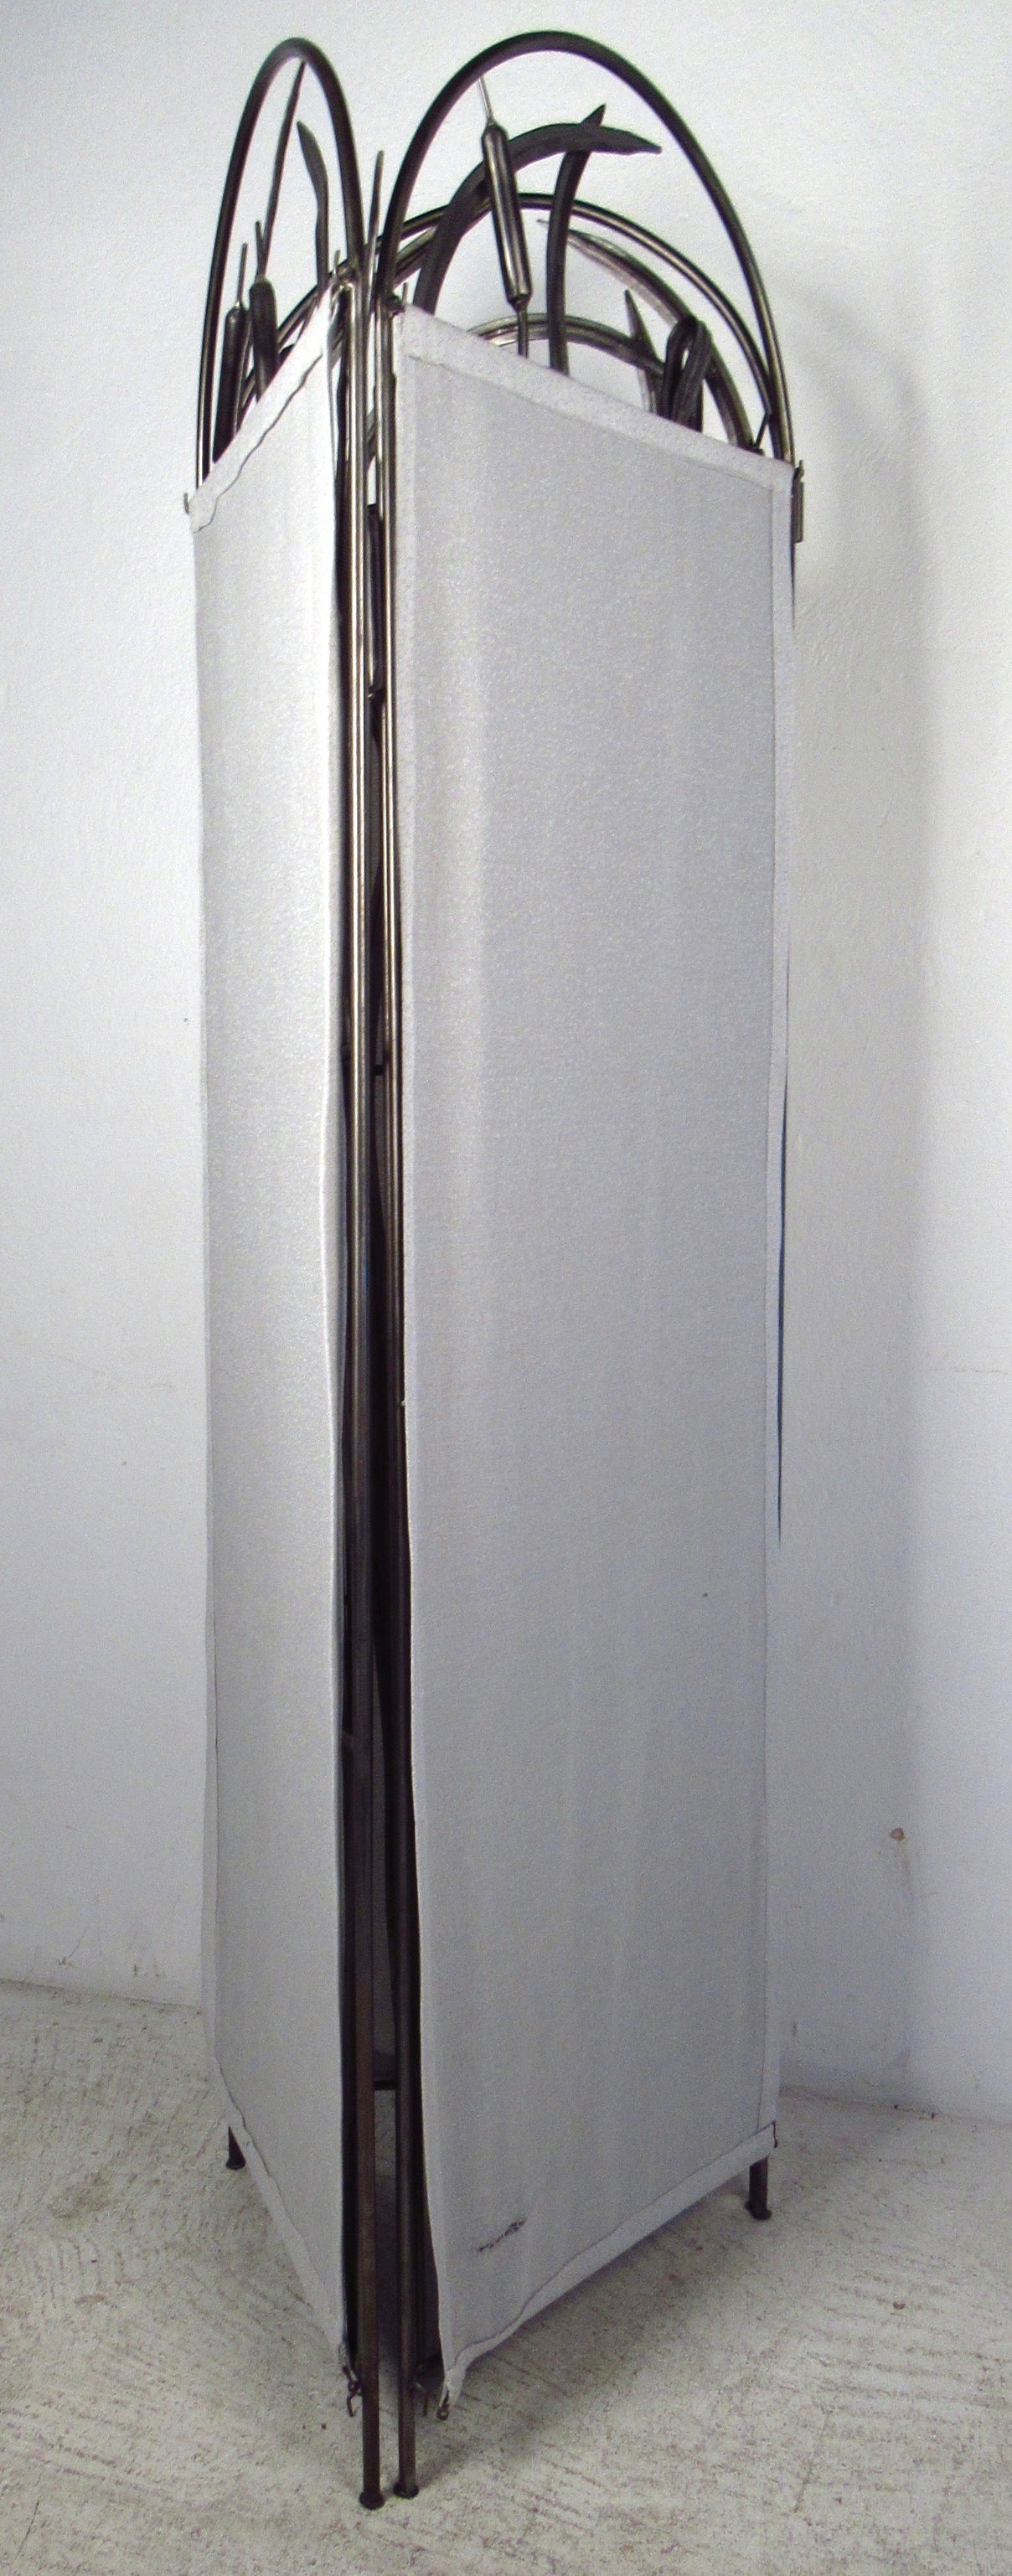 Three-piece metal divider with lovely sculptural design. Includes privacy cloth.

(Please confirm item location NY or NJ with dealer).